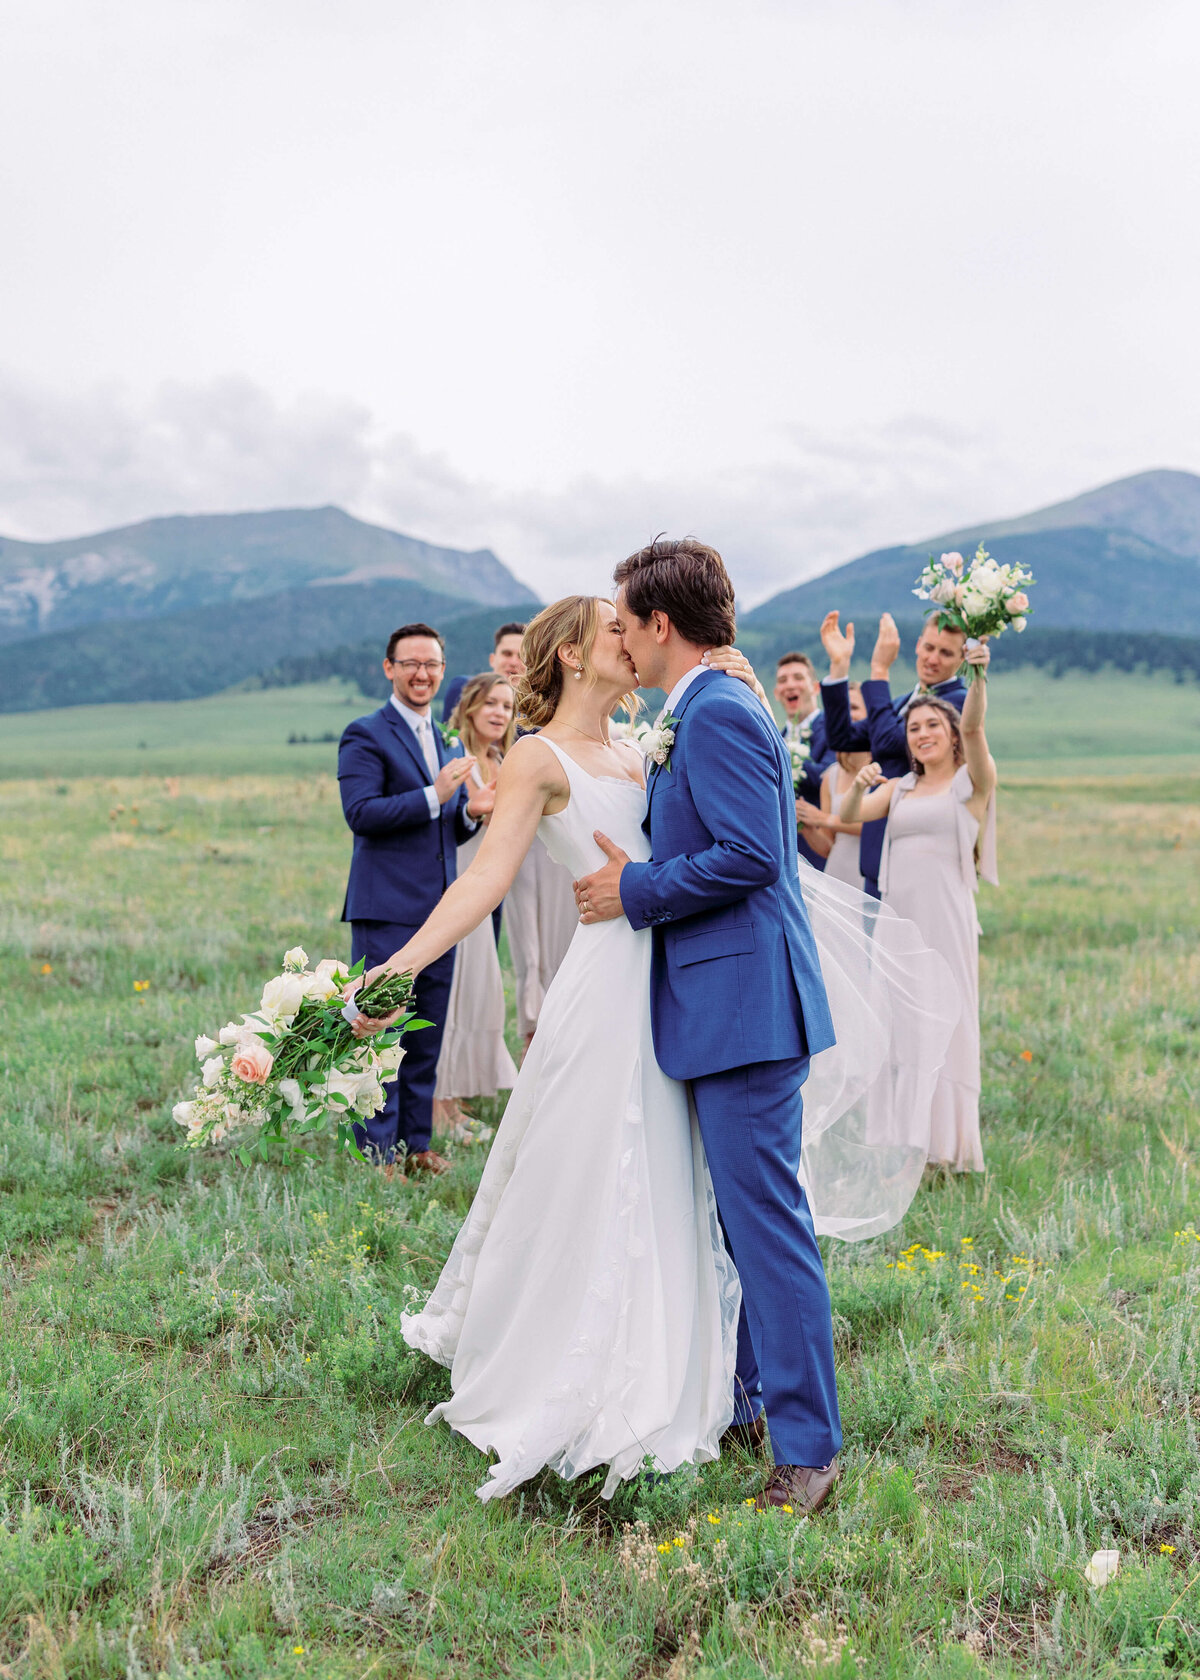 Virginia wedding photographer captures a moment of celebration as the bridal party cheers on the couple who are kissing